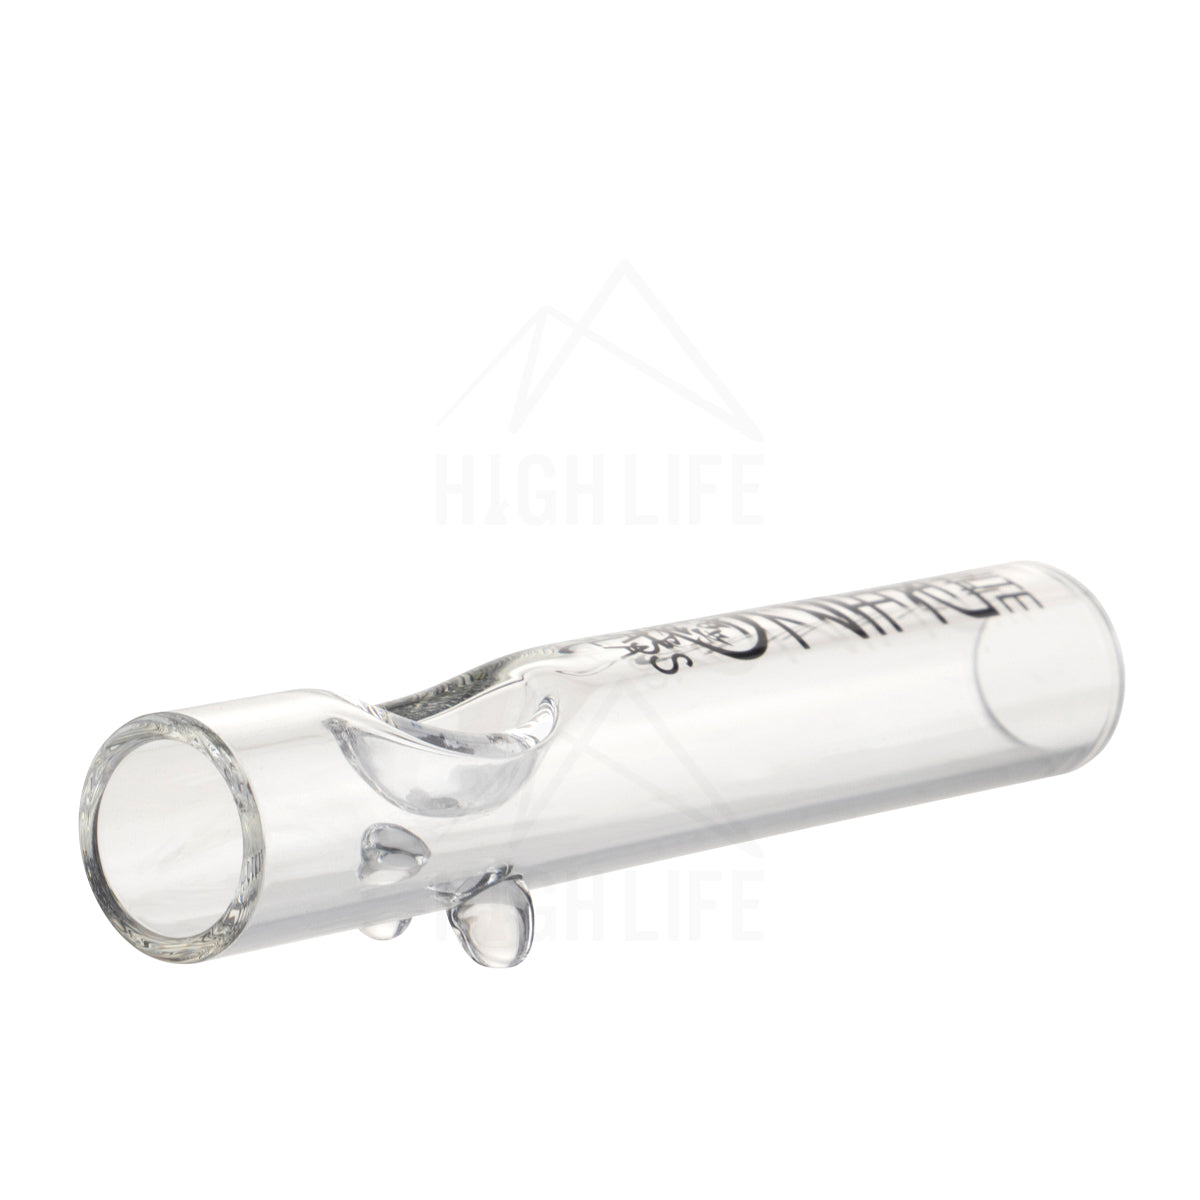 WHITE RHINO STEAM ROLLERS - 49 CT - best place to buy bongs online